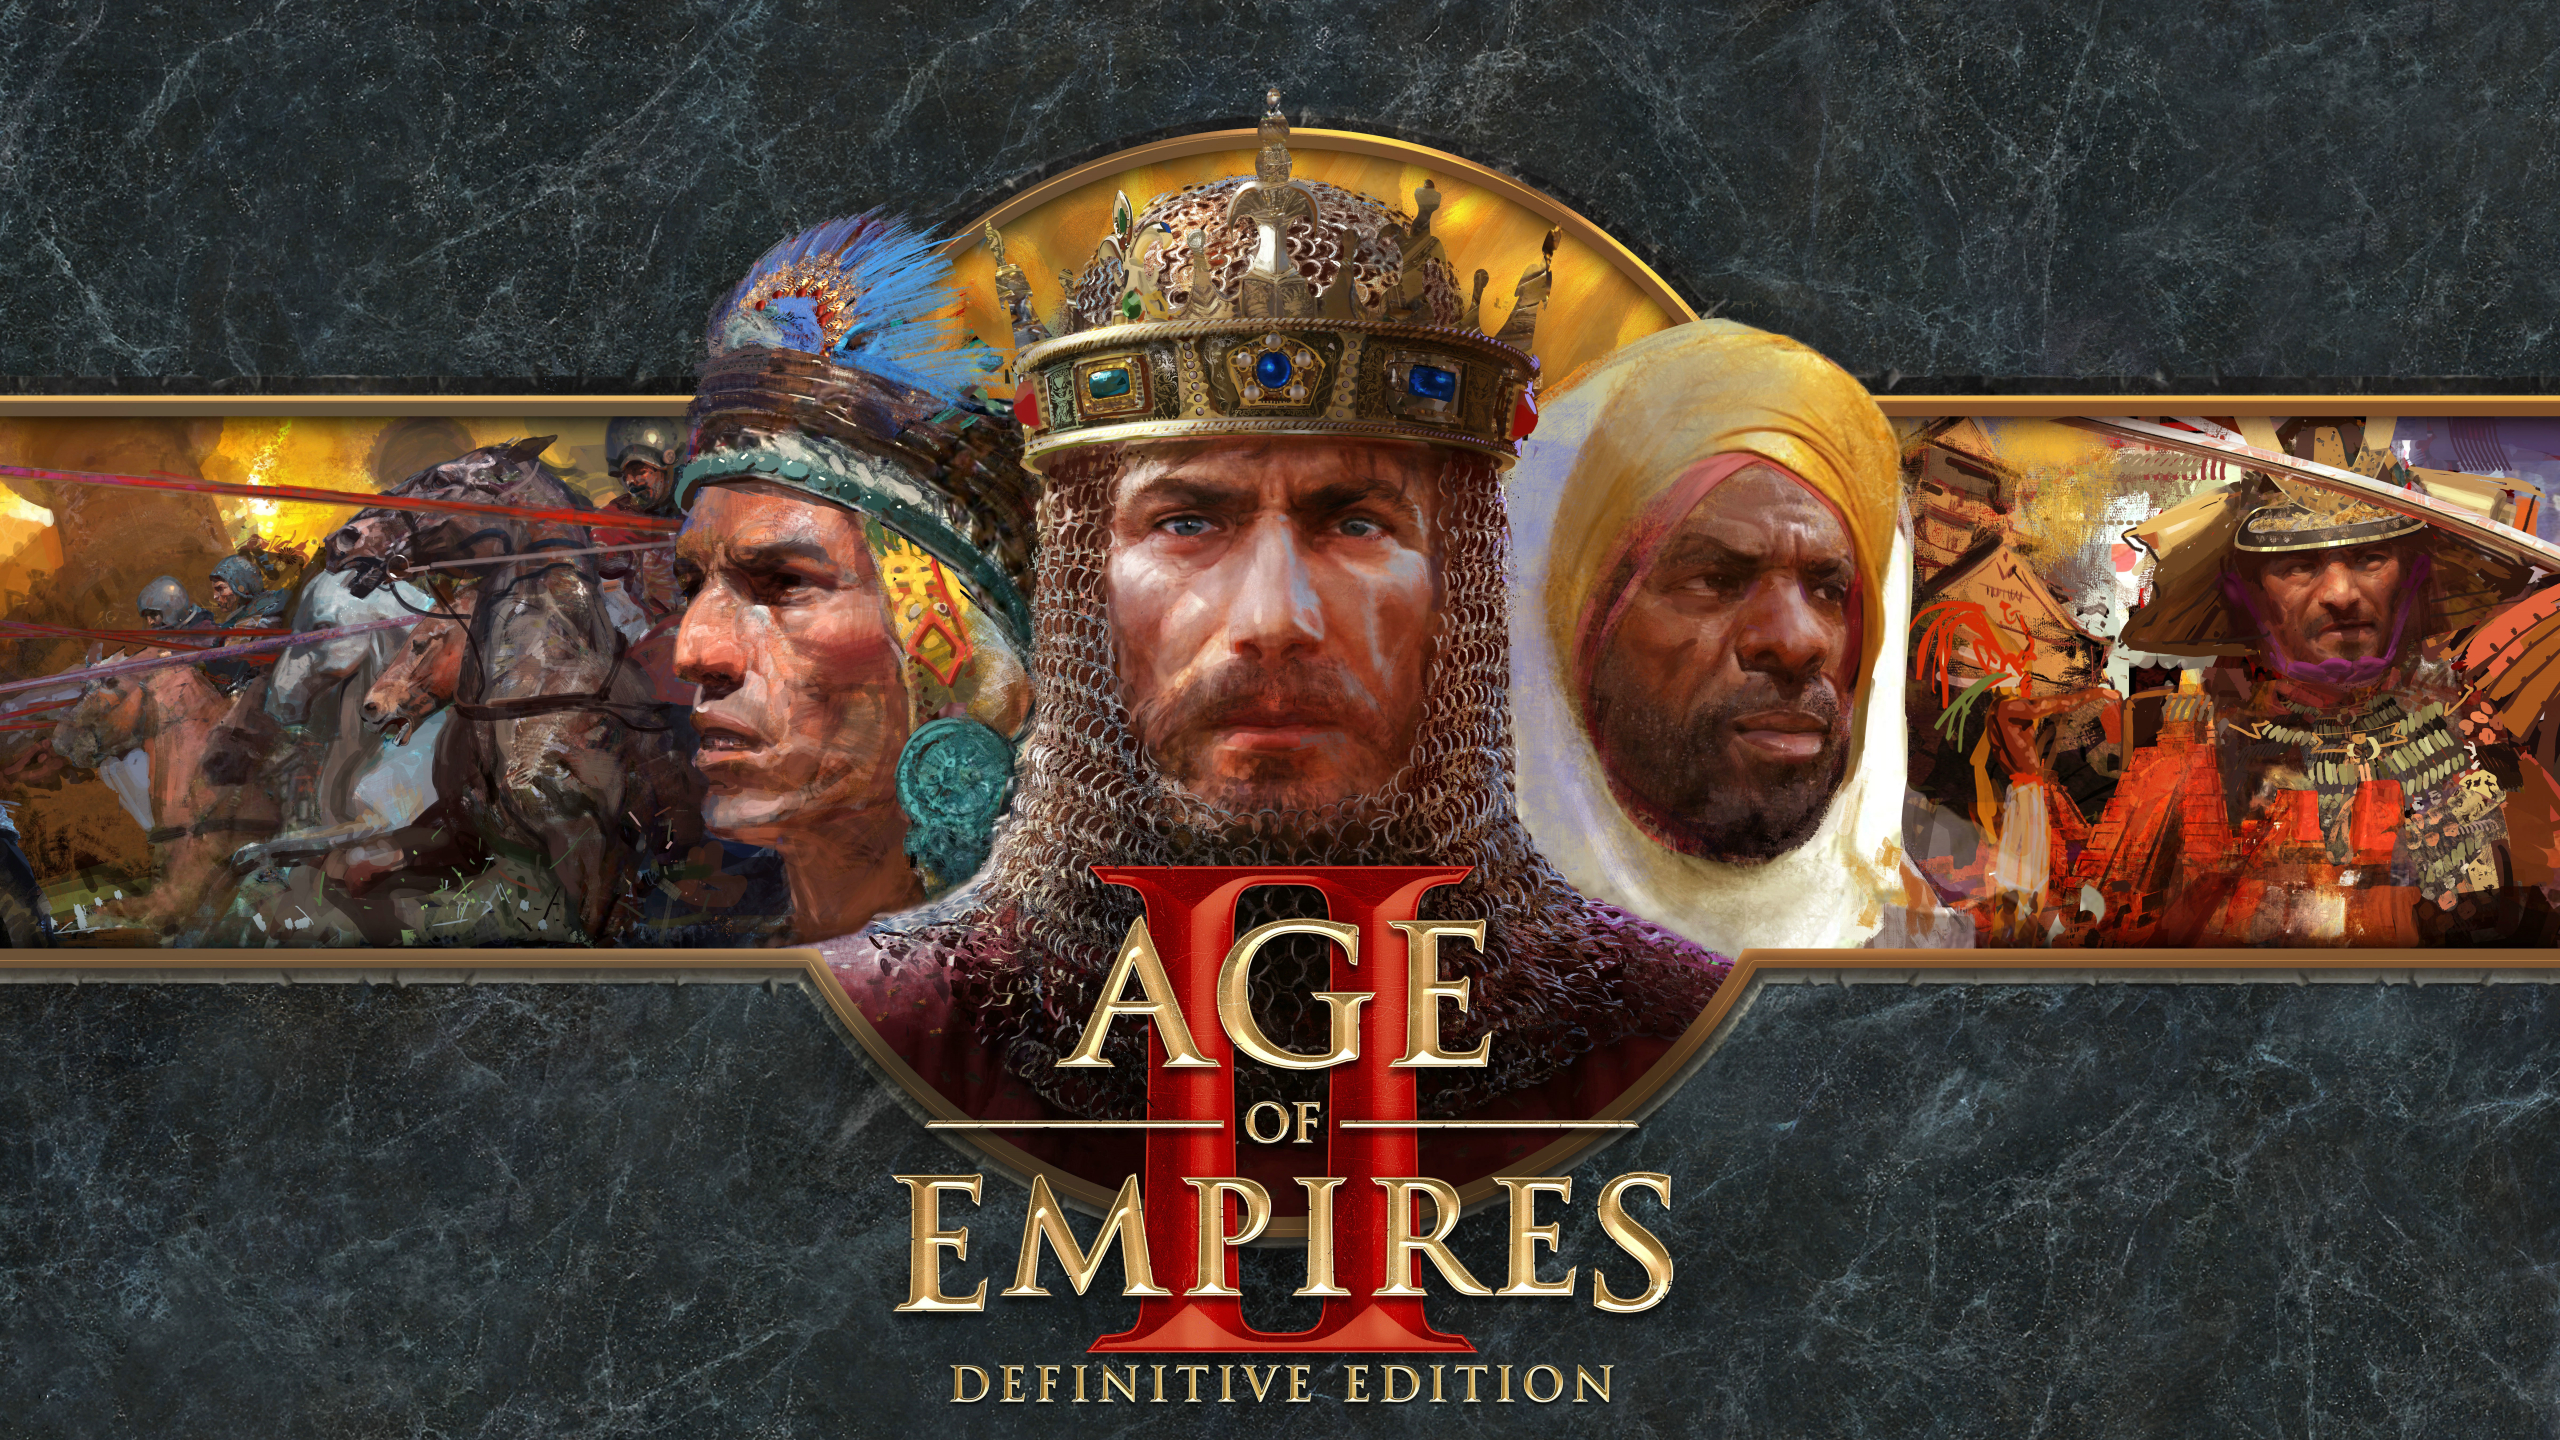 1310549 Age Of Empires IV HD - Rare Gallery HD Wallpapers